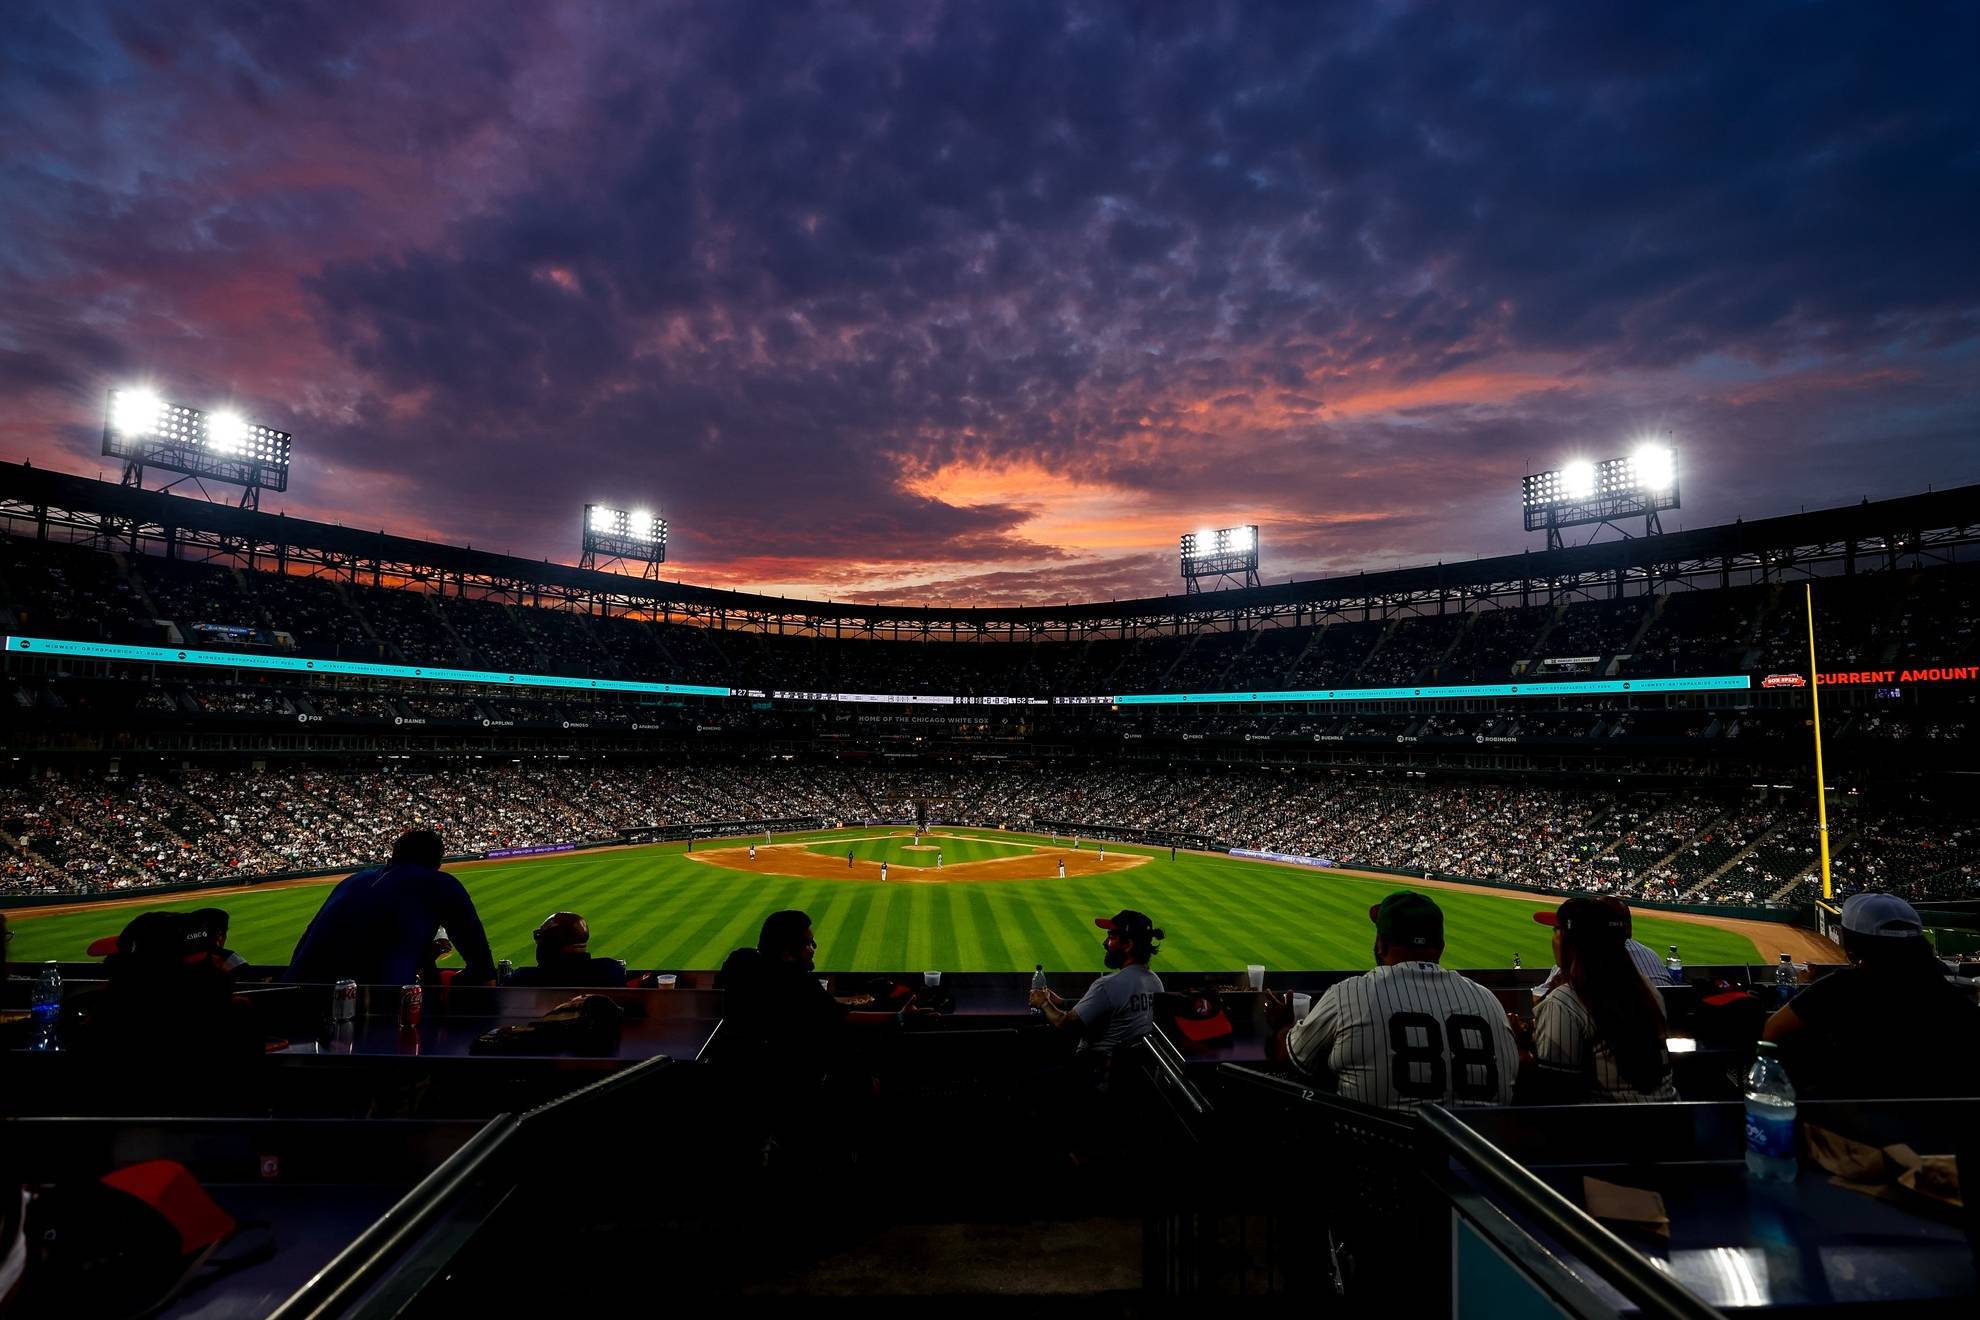 Two women were injured in a shooting during a White Sox baseball game